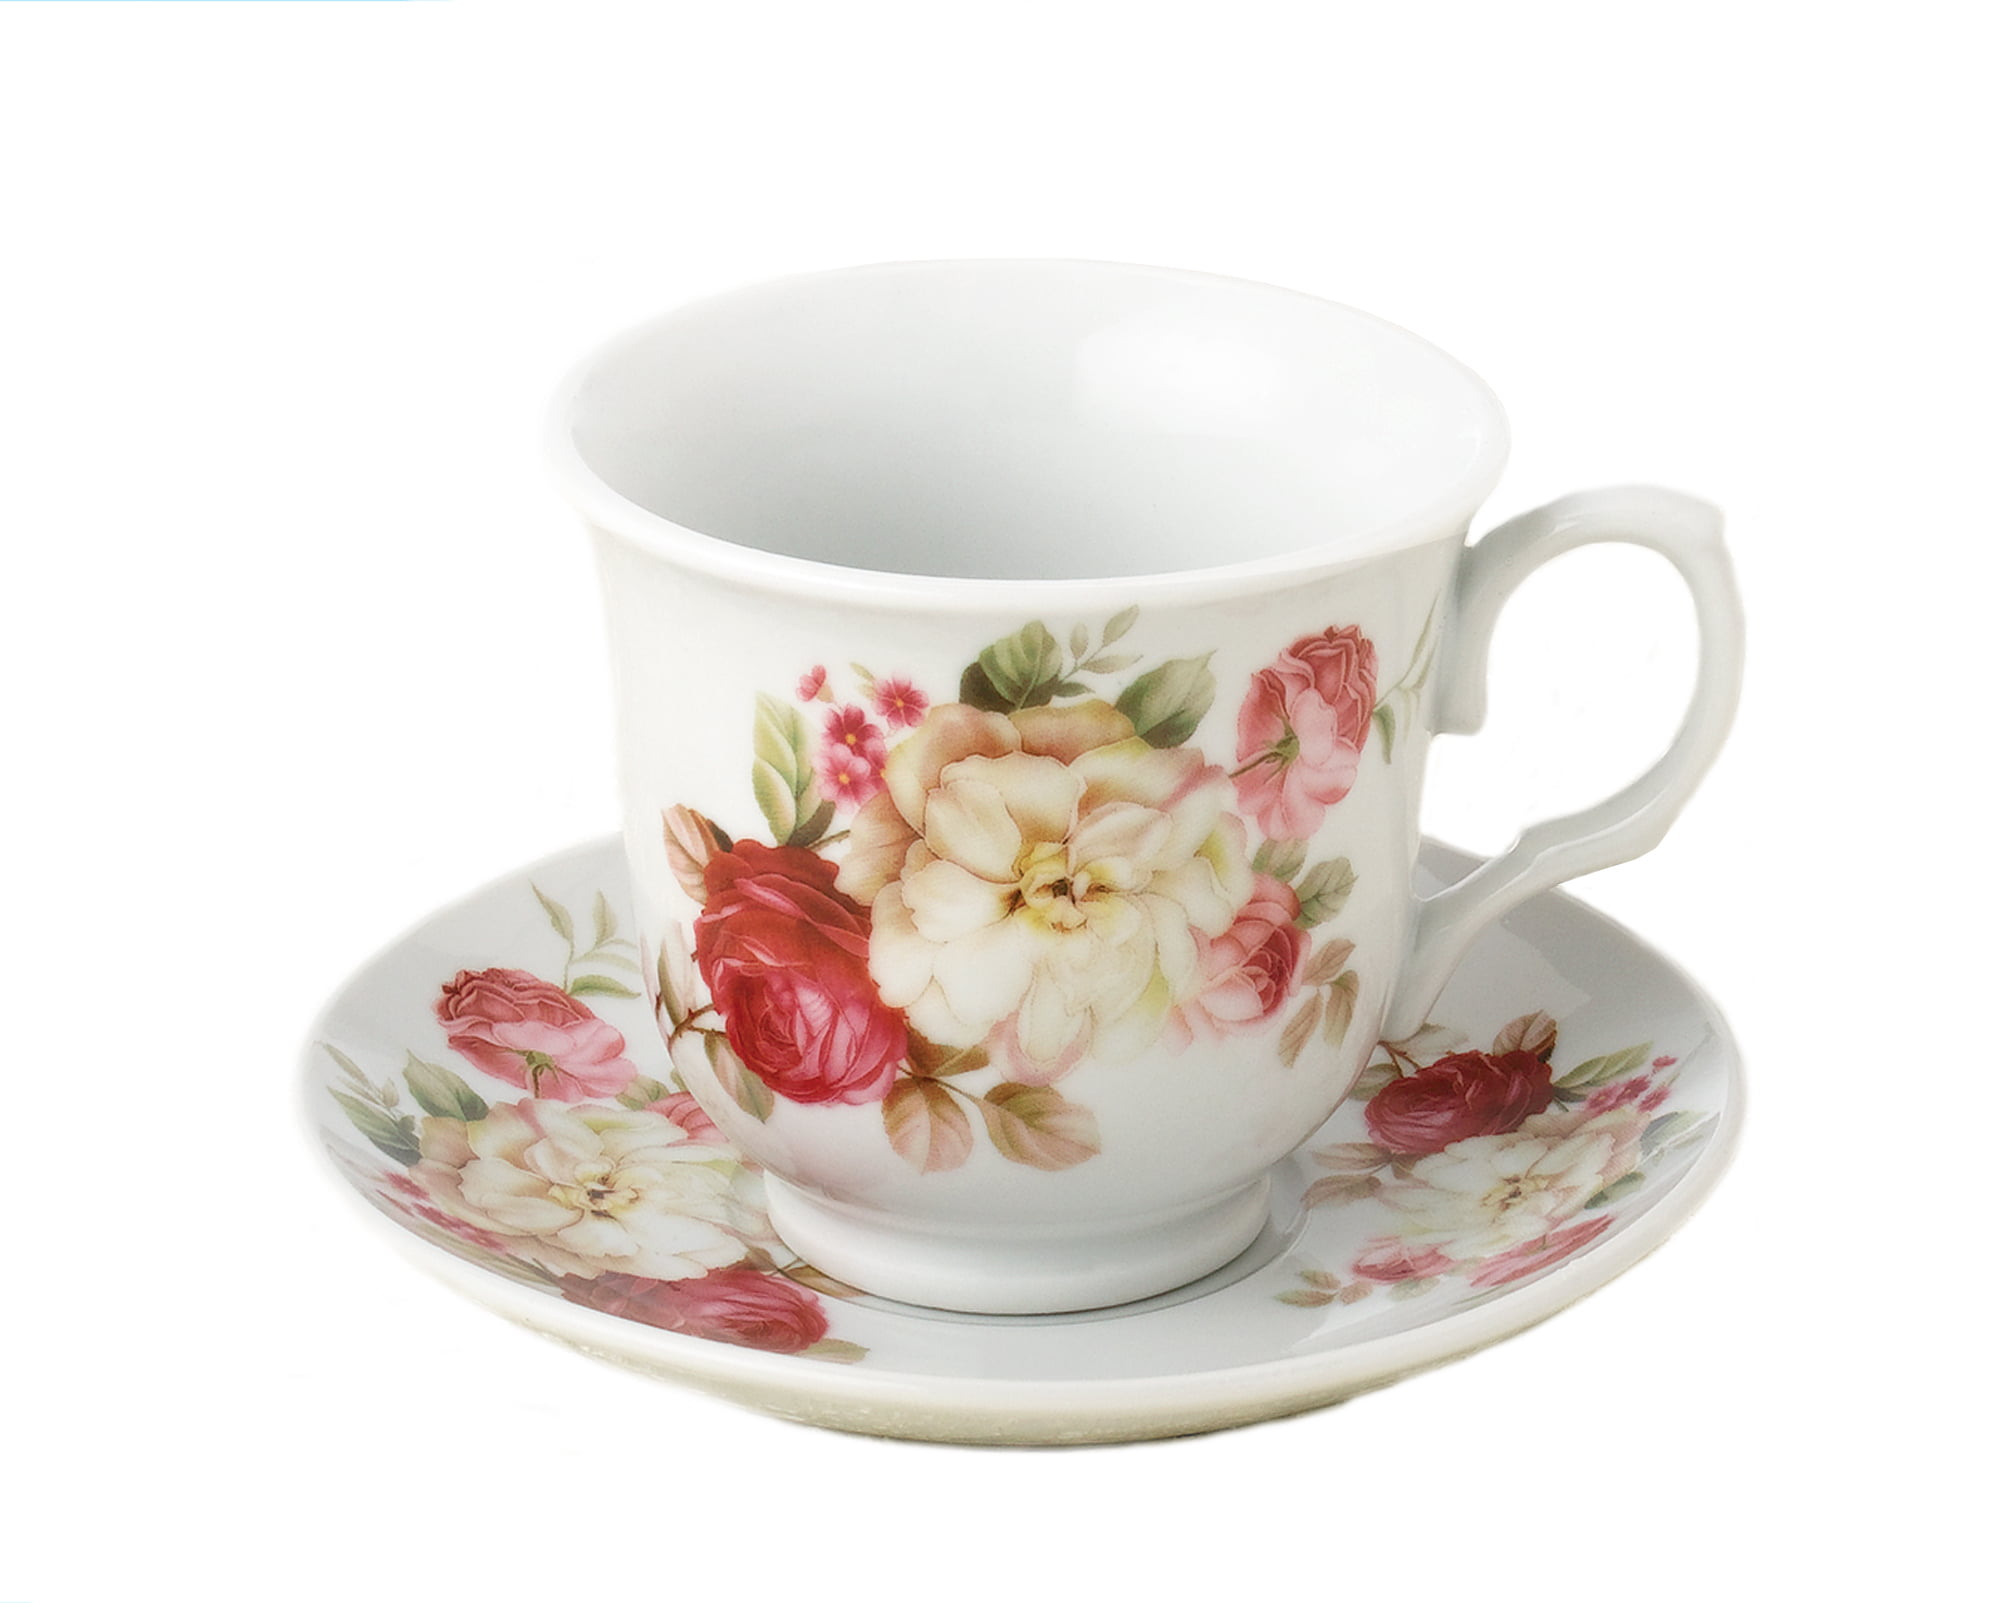 Lidia's Kitchen 4-piece Cup and Saucer Set